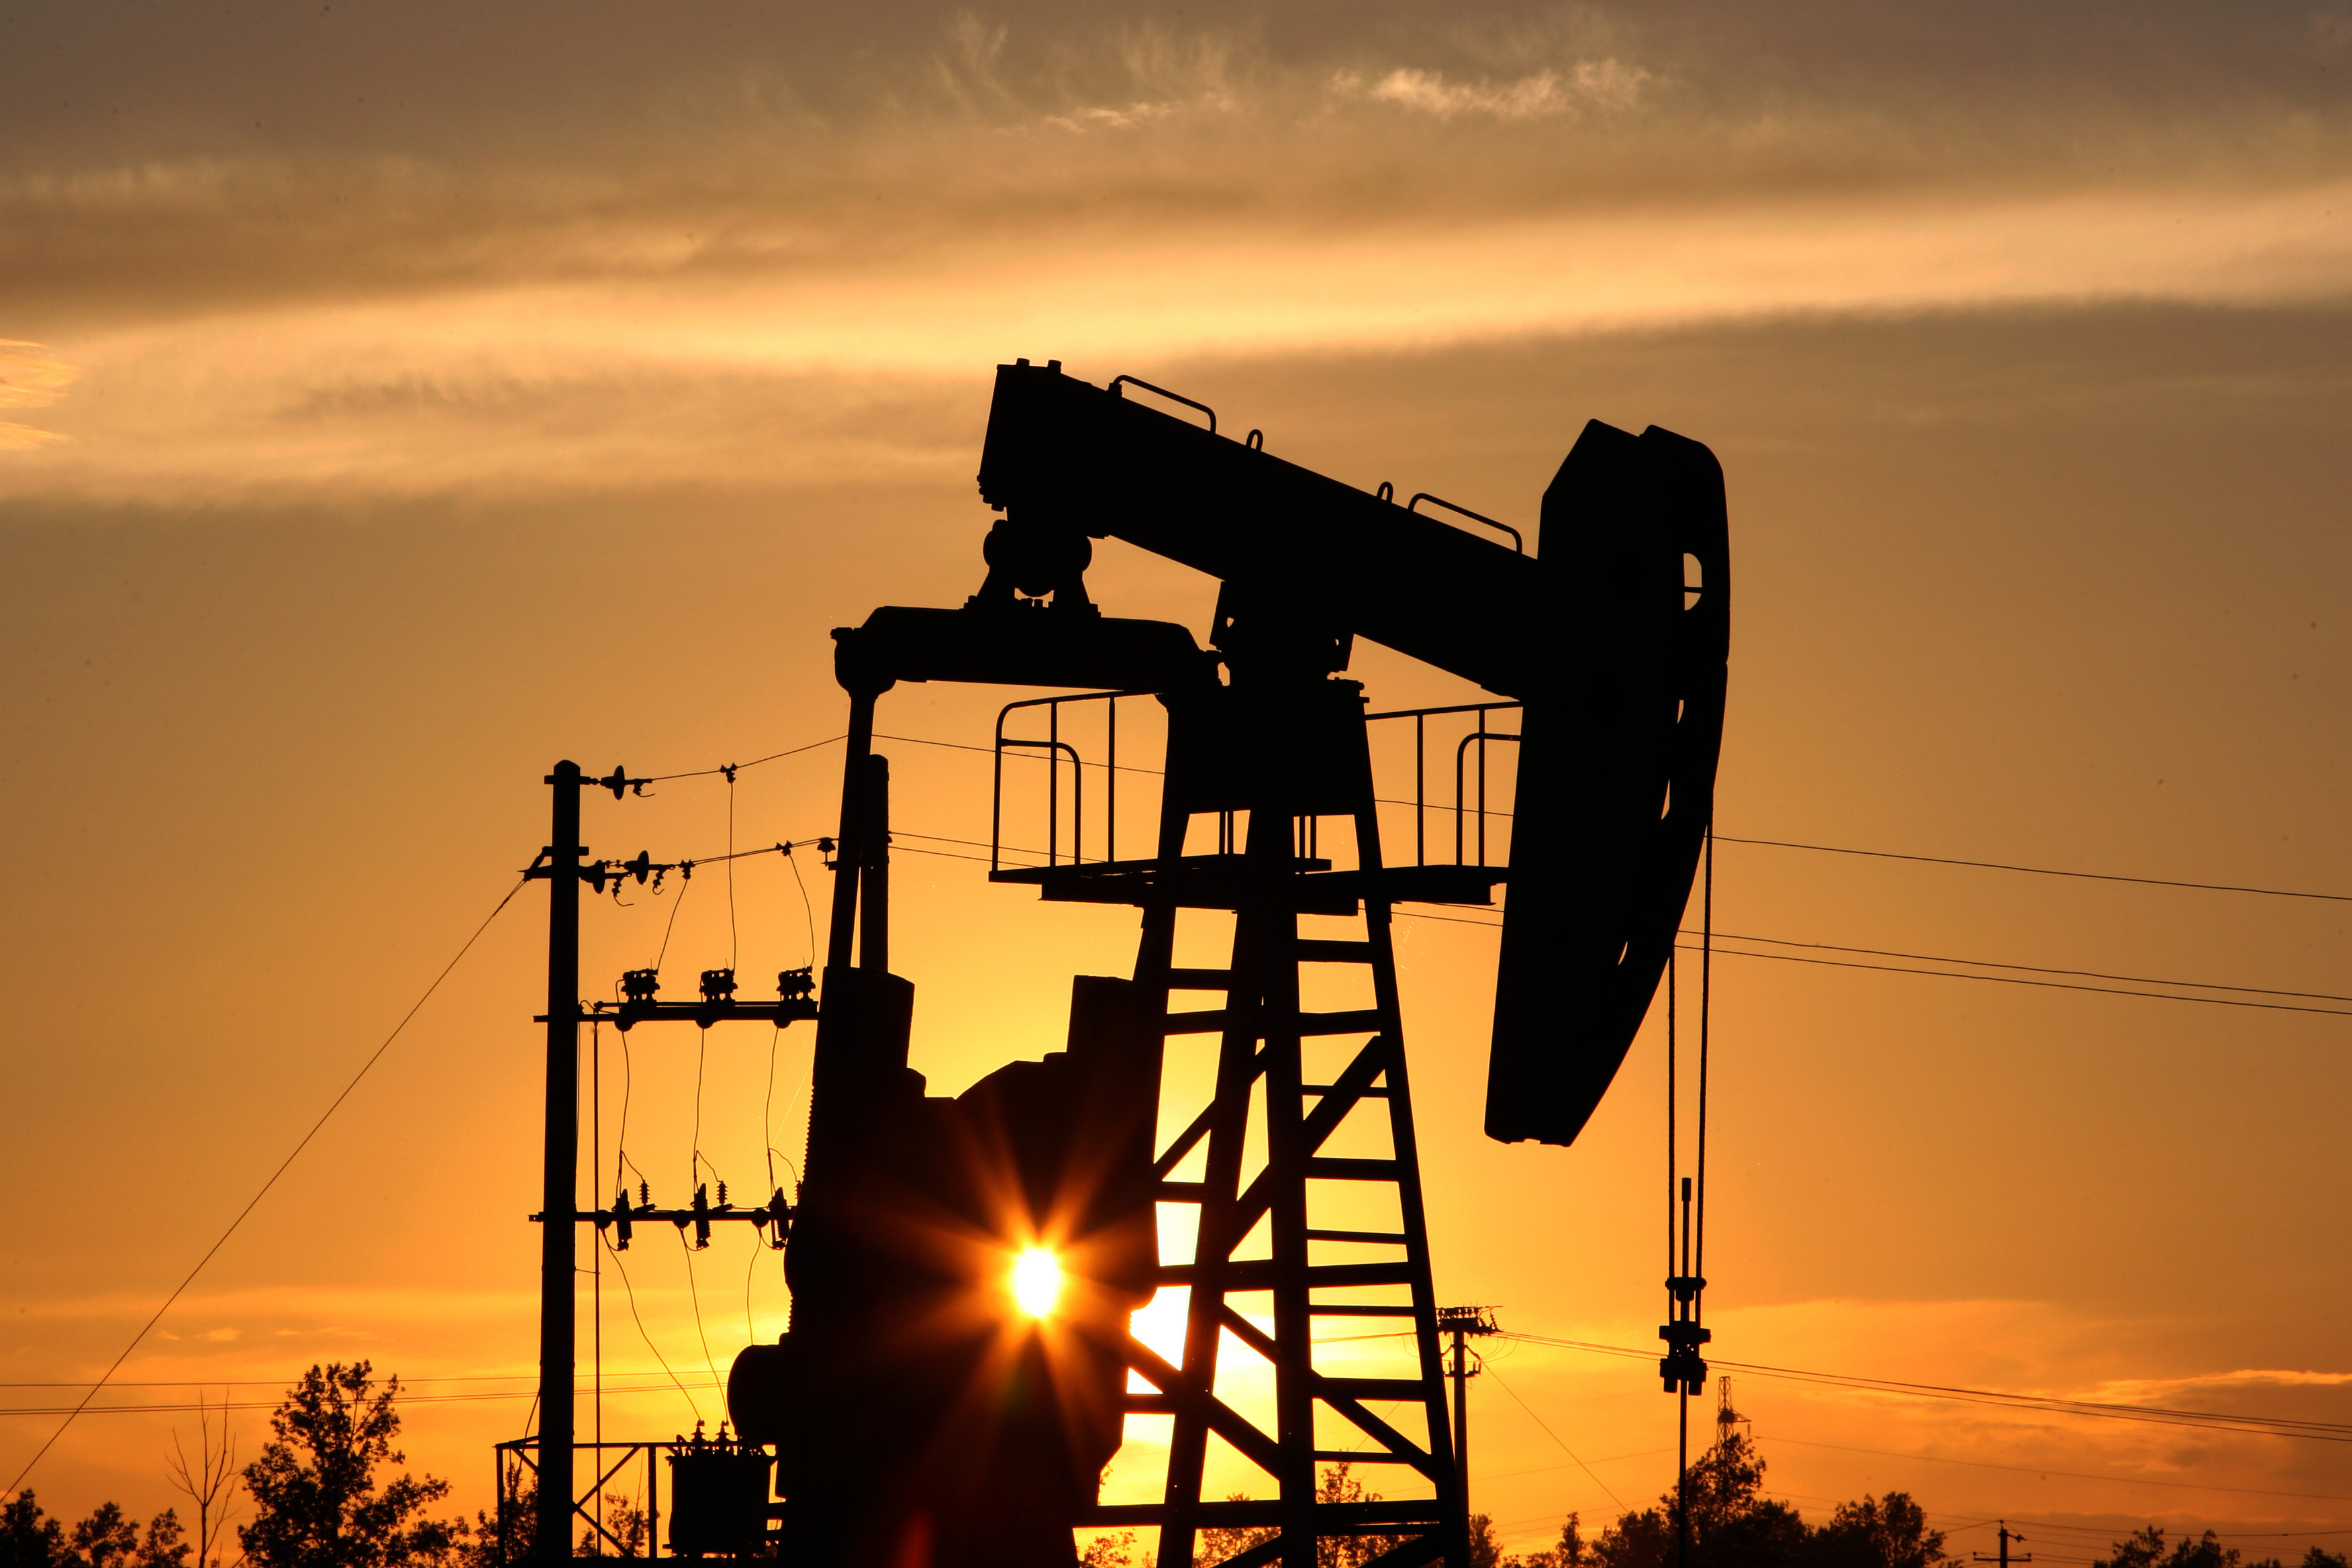 A CNPC 'nodding donkey' oil pump is seen at sunset in an oilfield outside Daqing, Heilongjiang province, China. (Lucas Schifres&mdash;Pictobank/Getty Images)